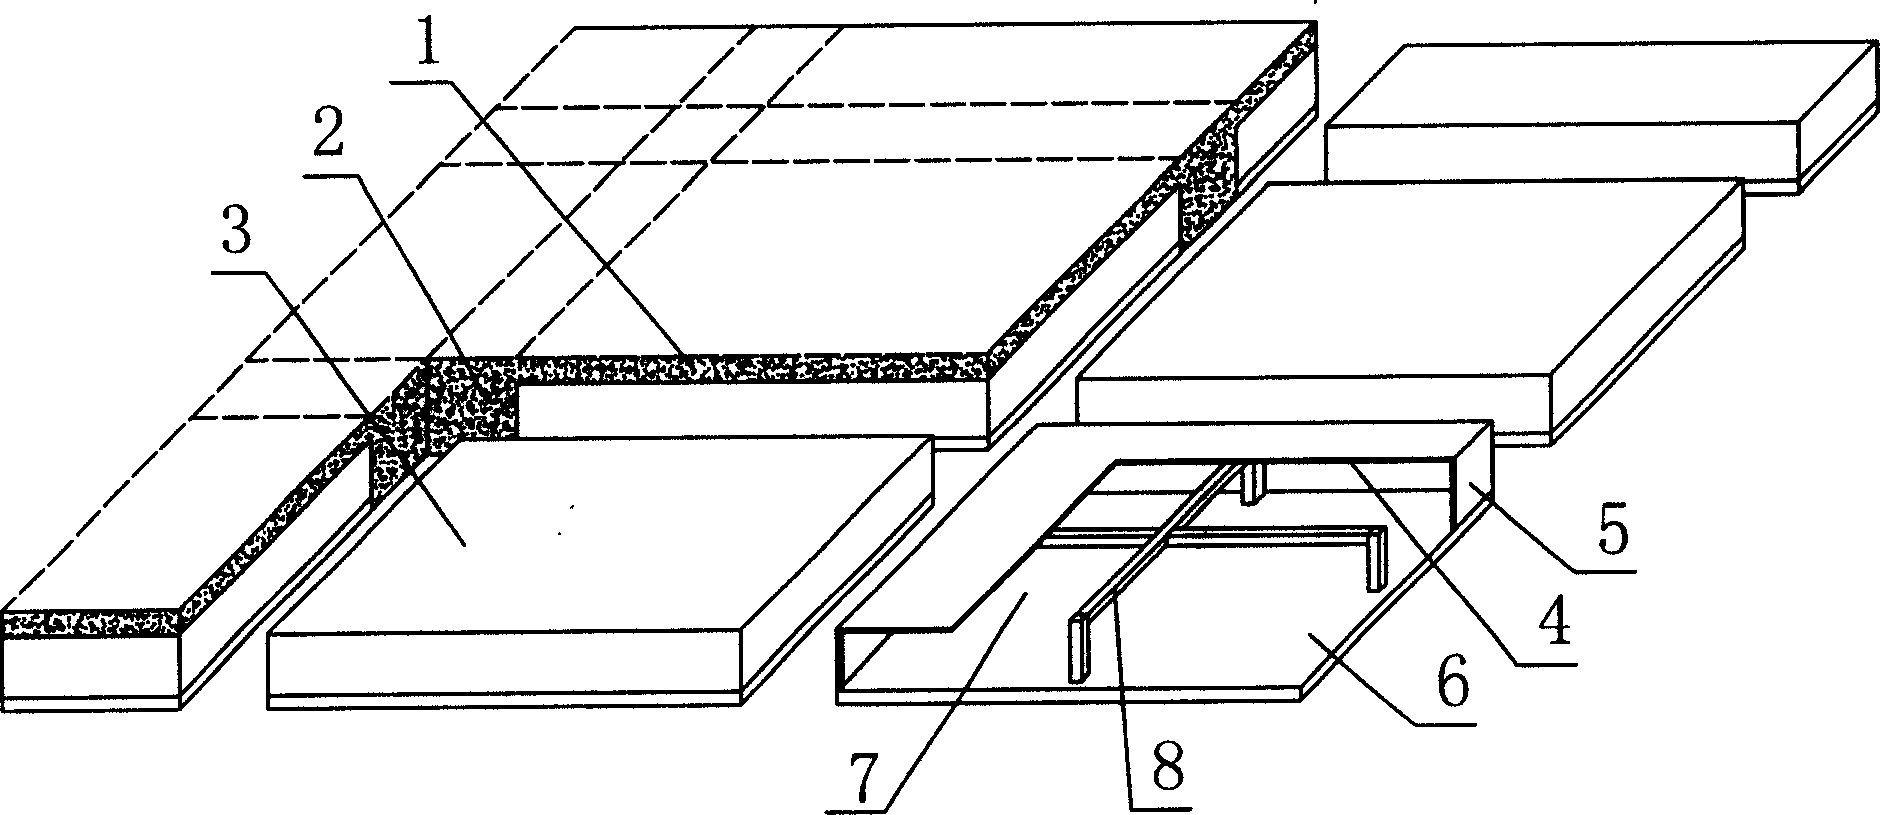 Reinforced concrete stereo load-carrying structure floor